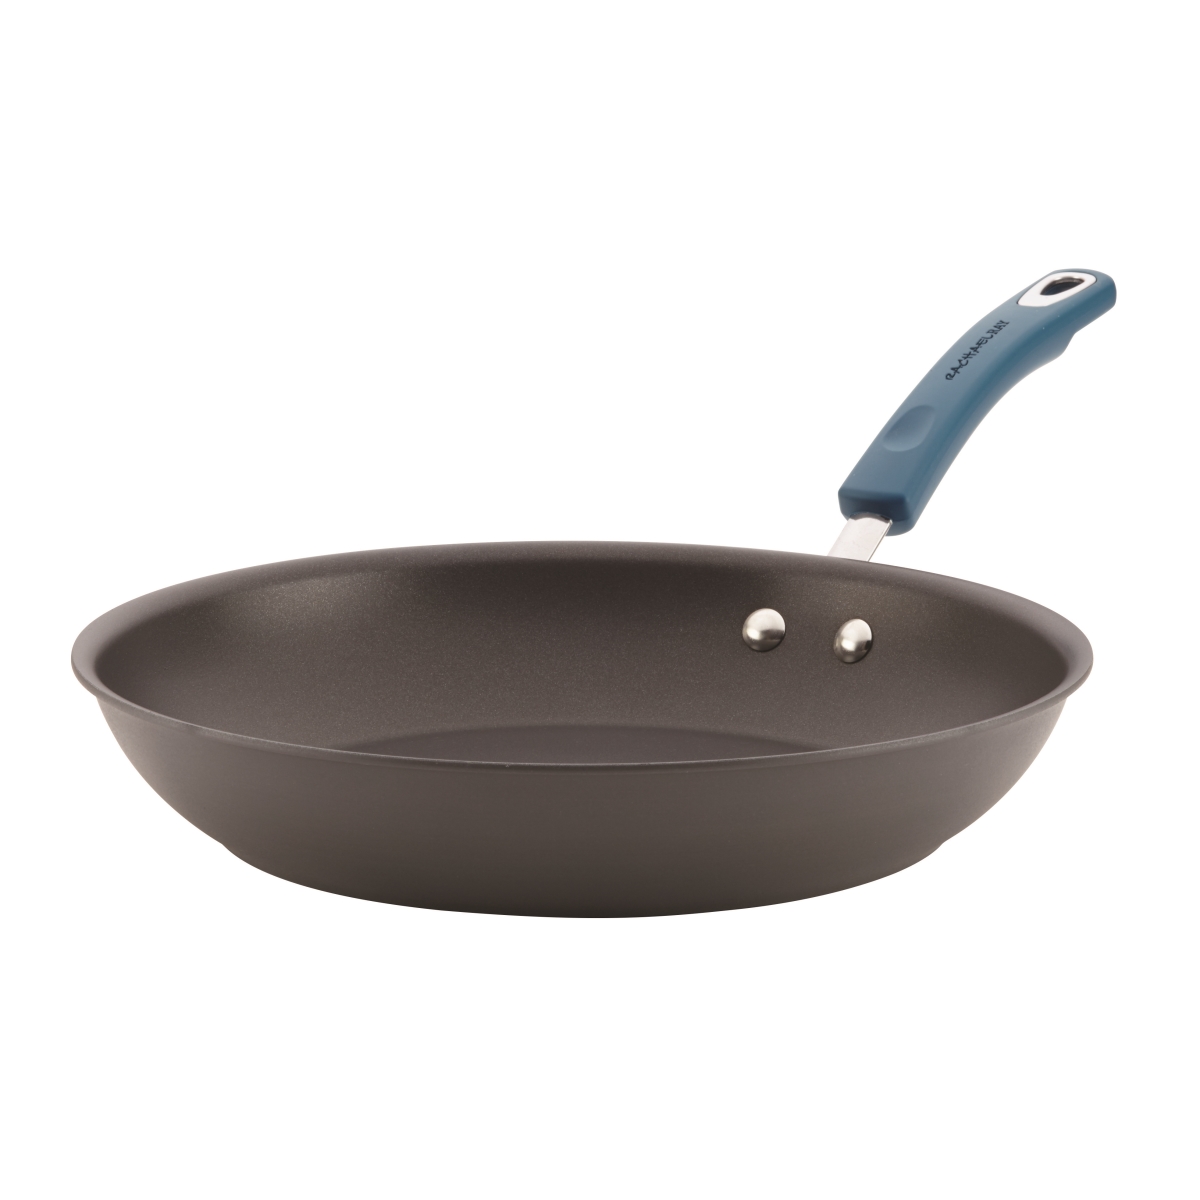 87651 12.5 In. Hard-anodized Aluminum Nonstick Skillet, Gray With Marine Blue Handles